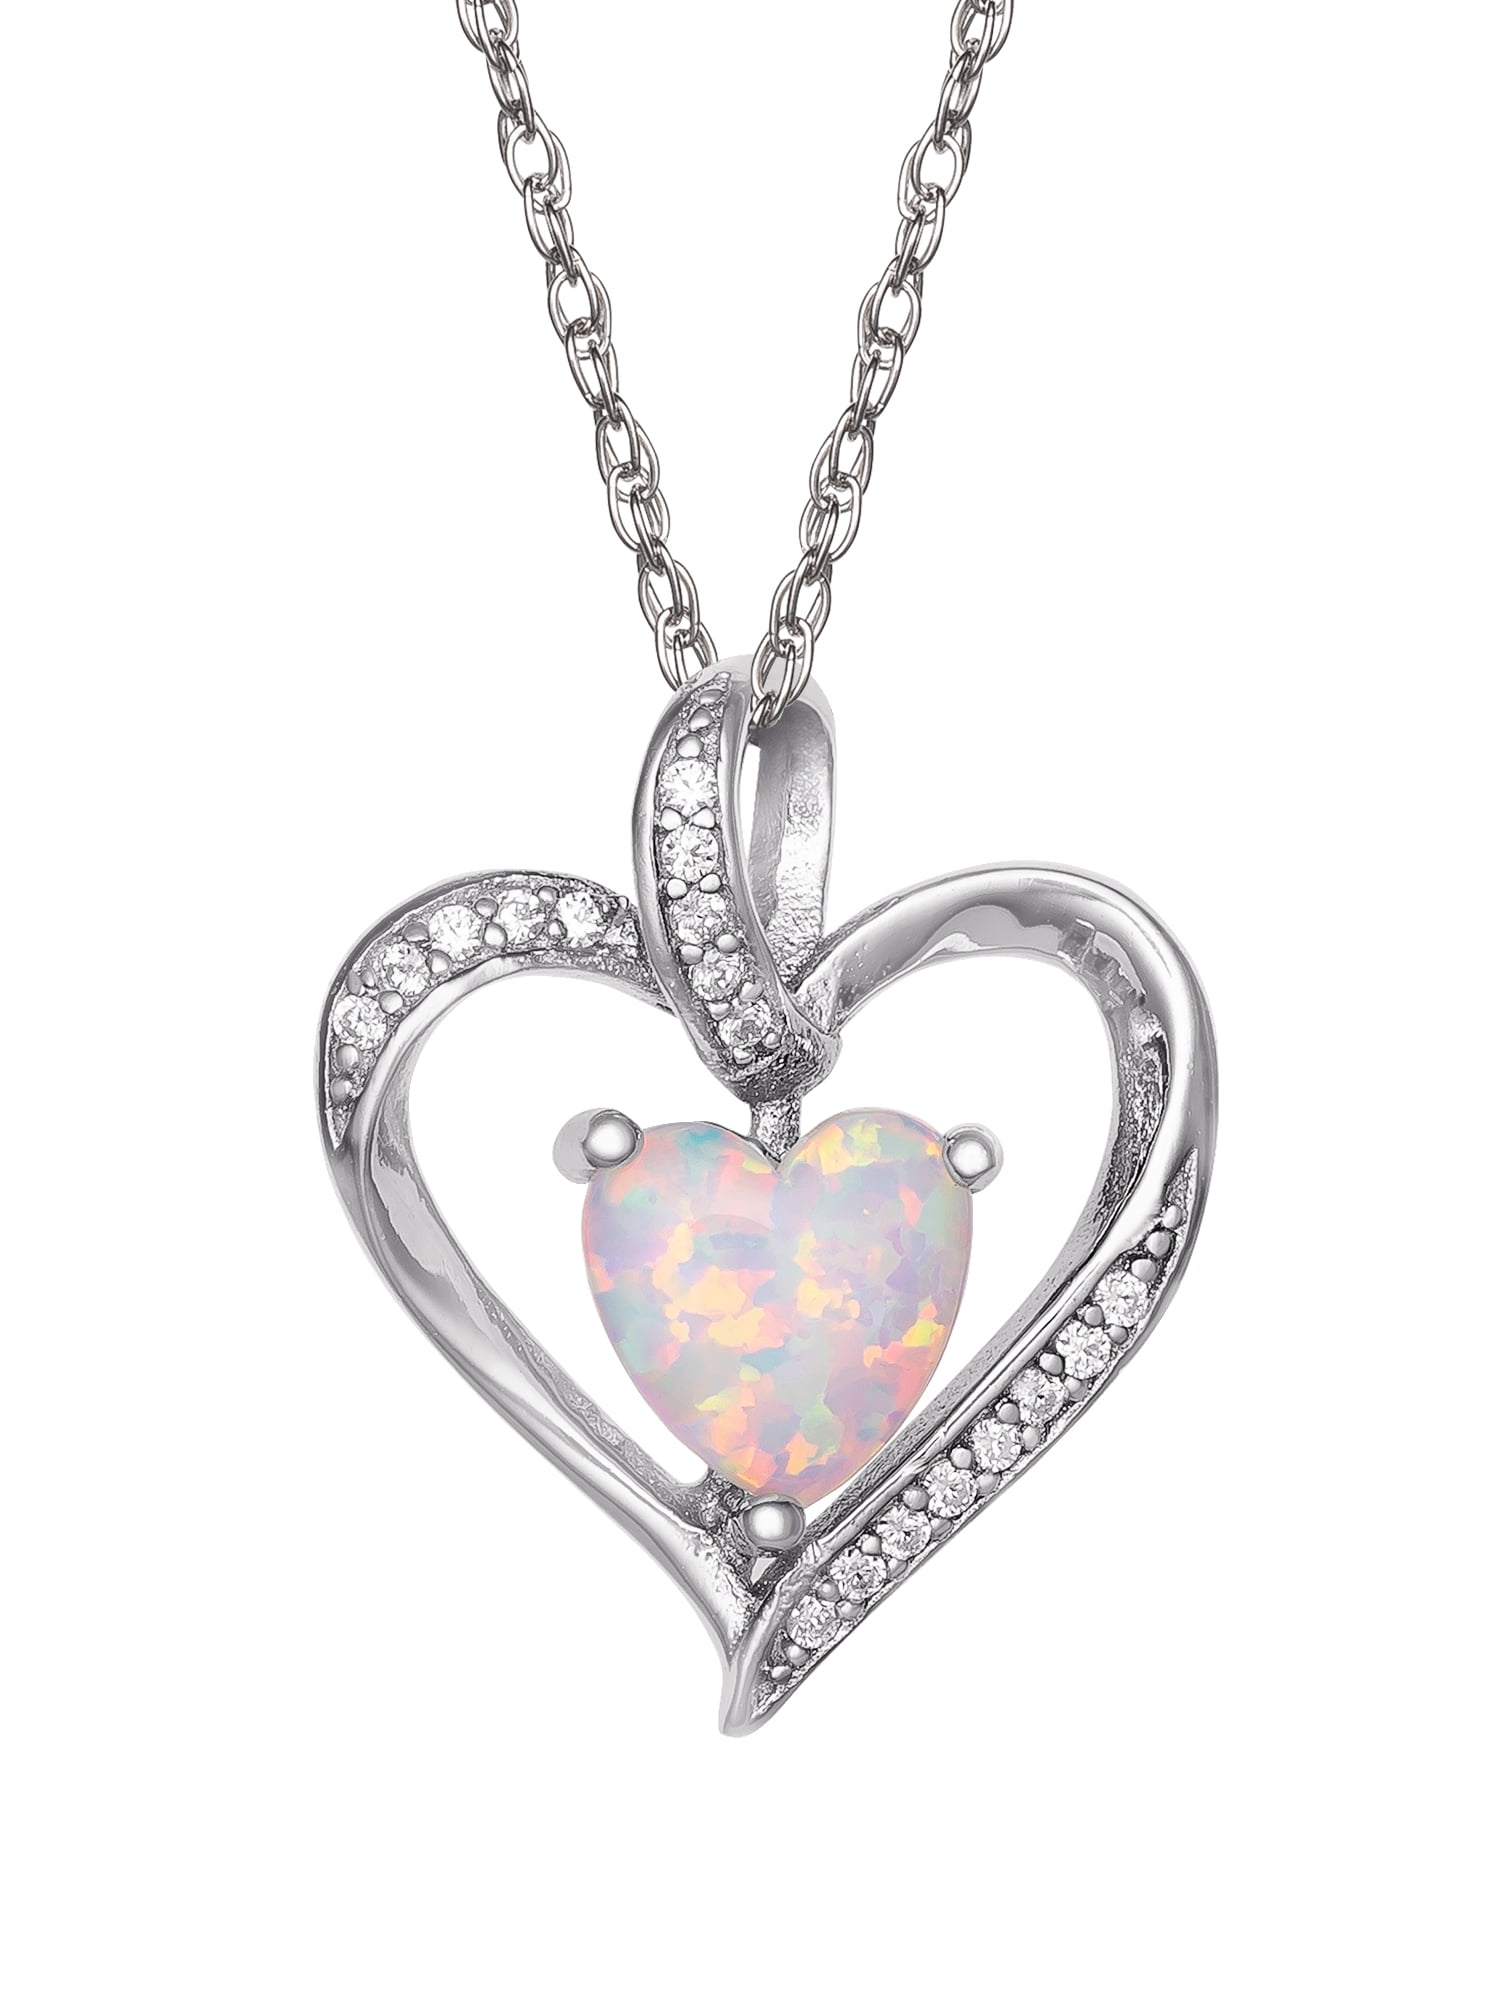 Women's Gold/Silver Plated  Double Heart Chain Necklace Pendant Jewelry Hot Sale 